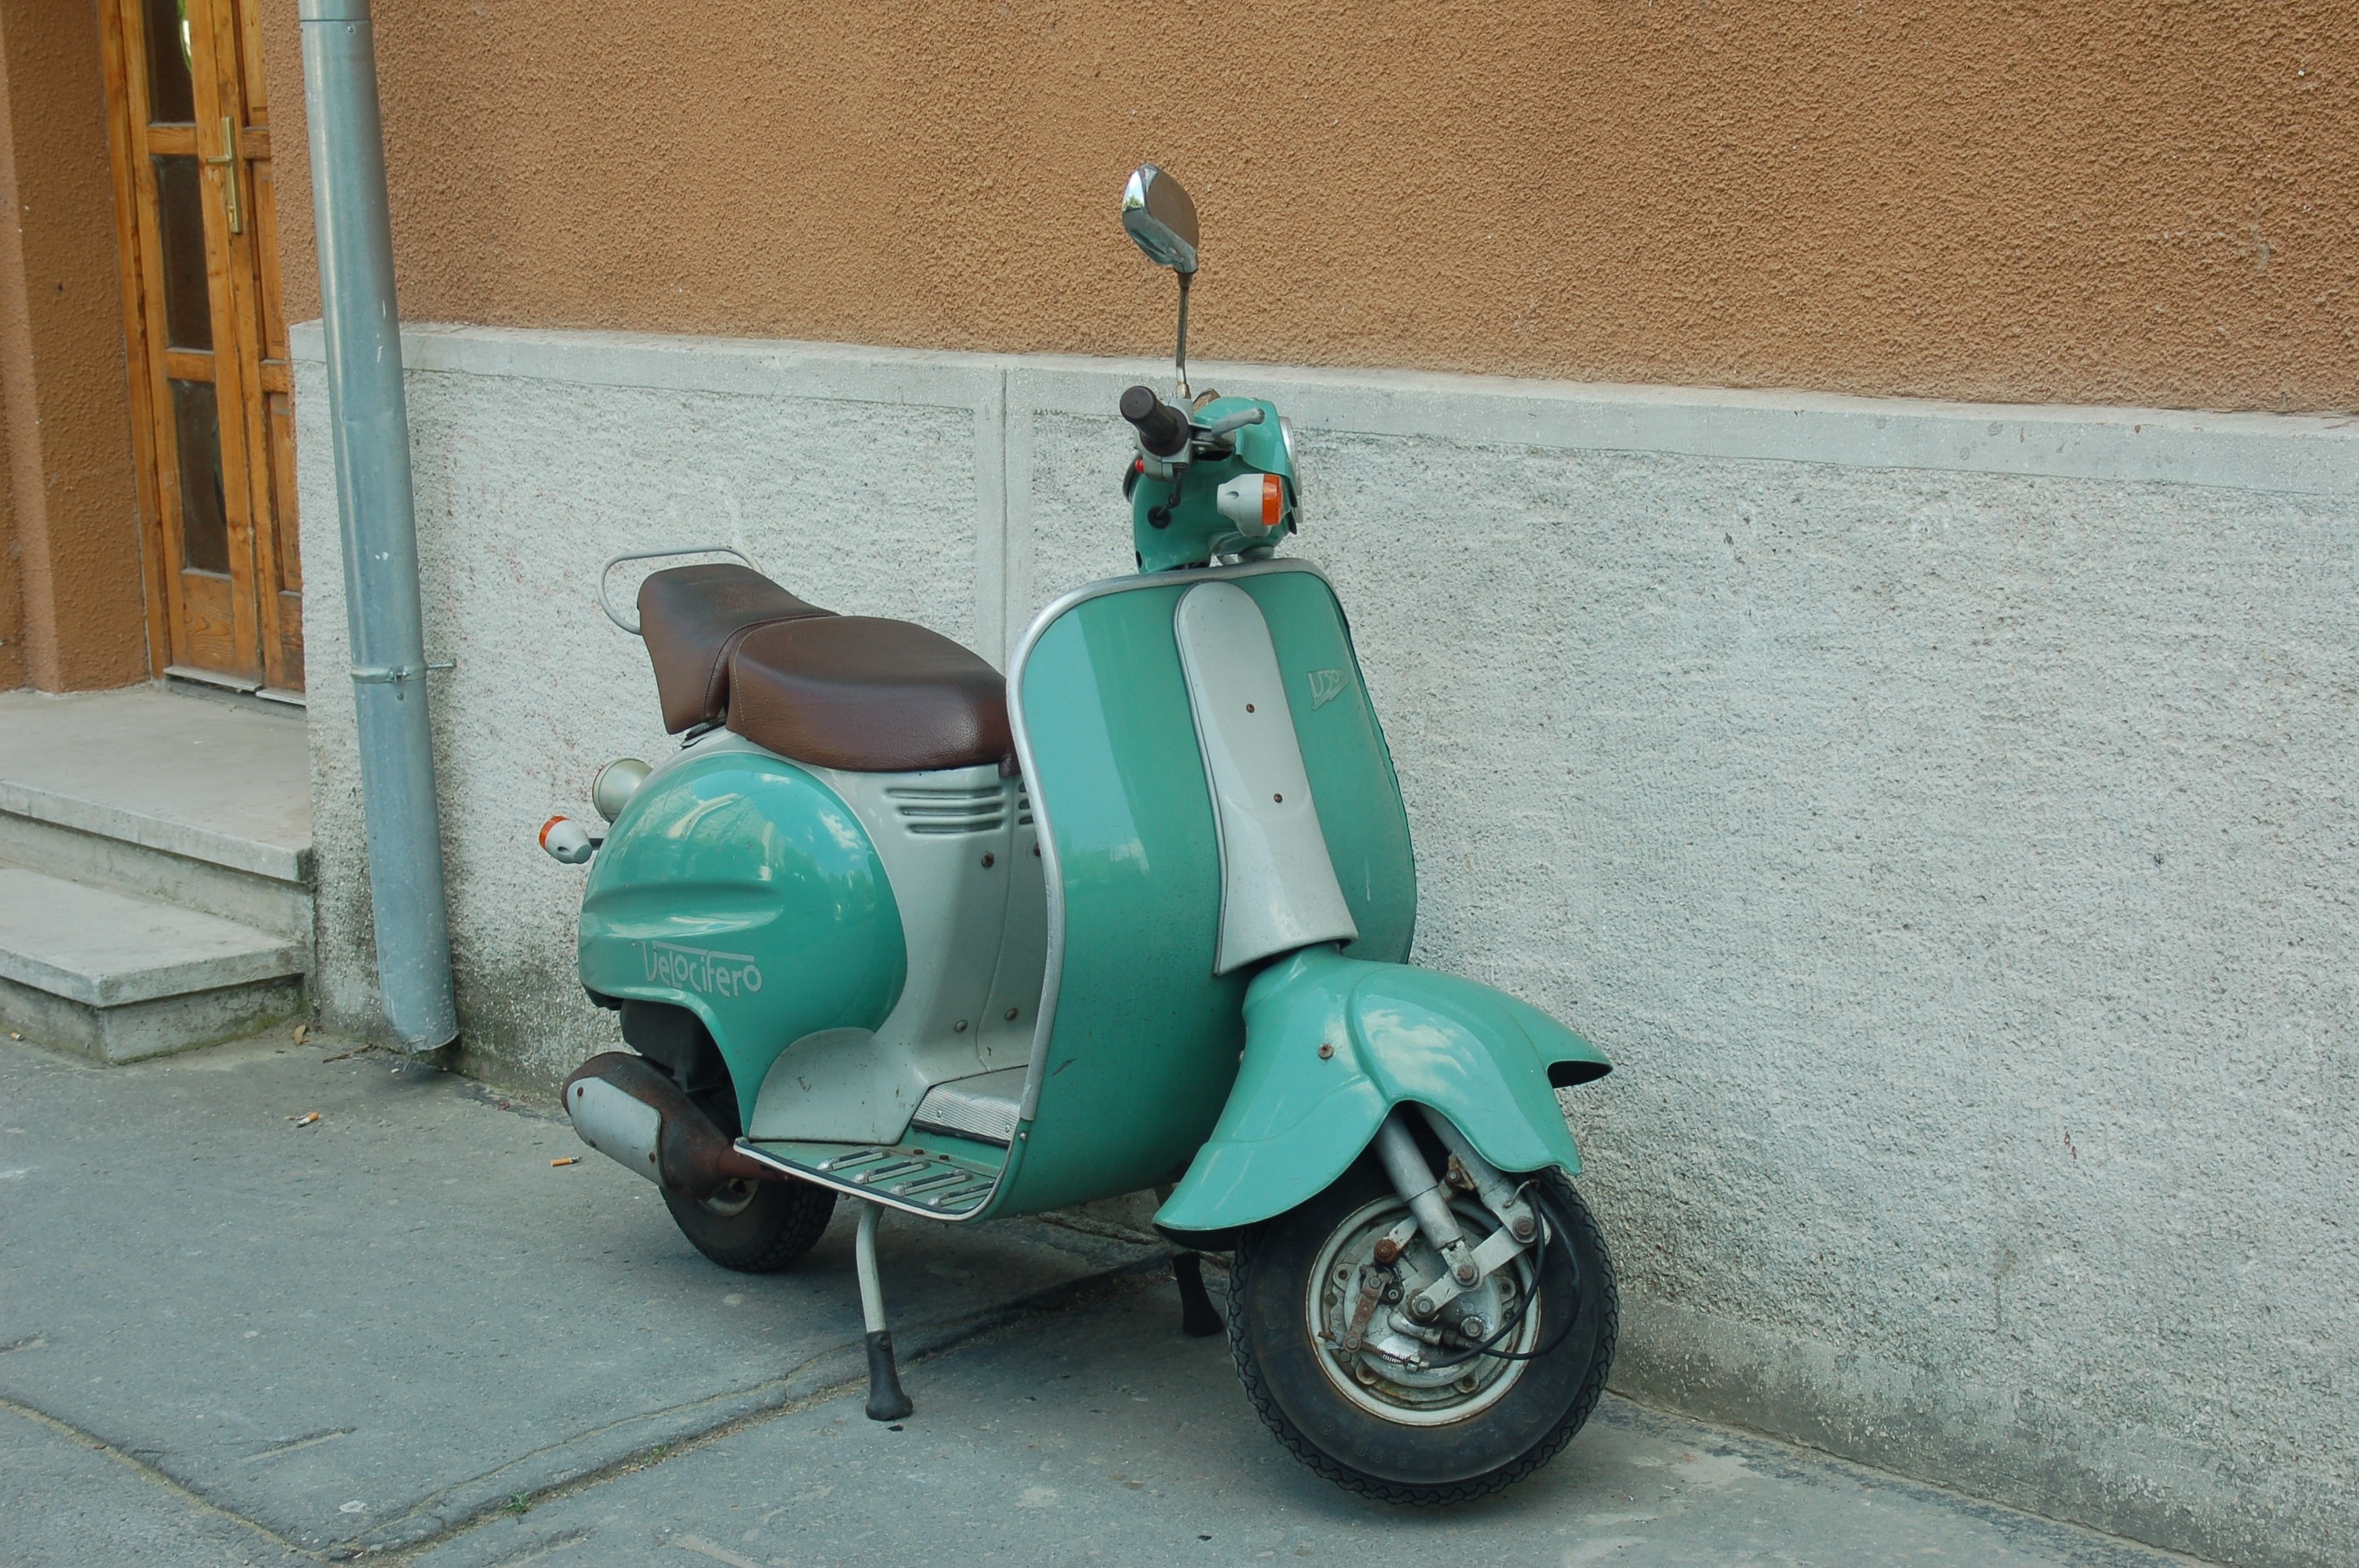 teal and white moped scooter